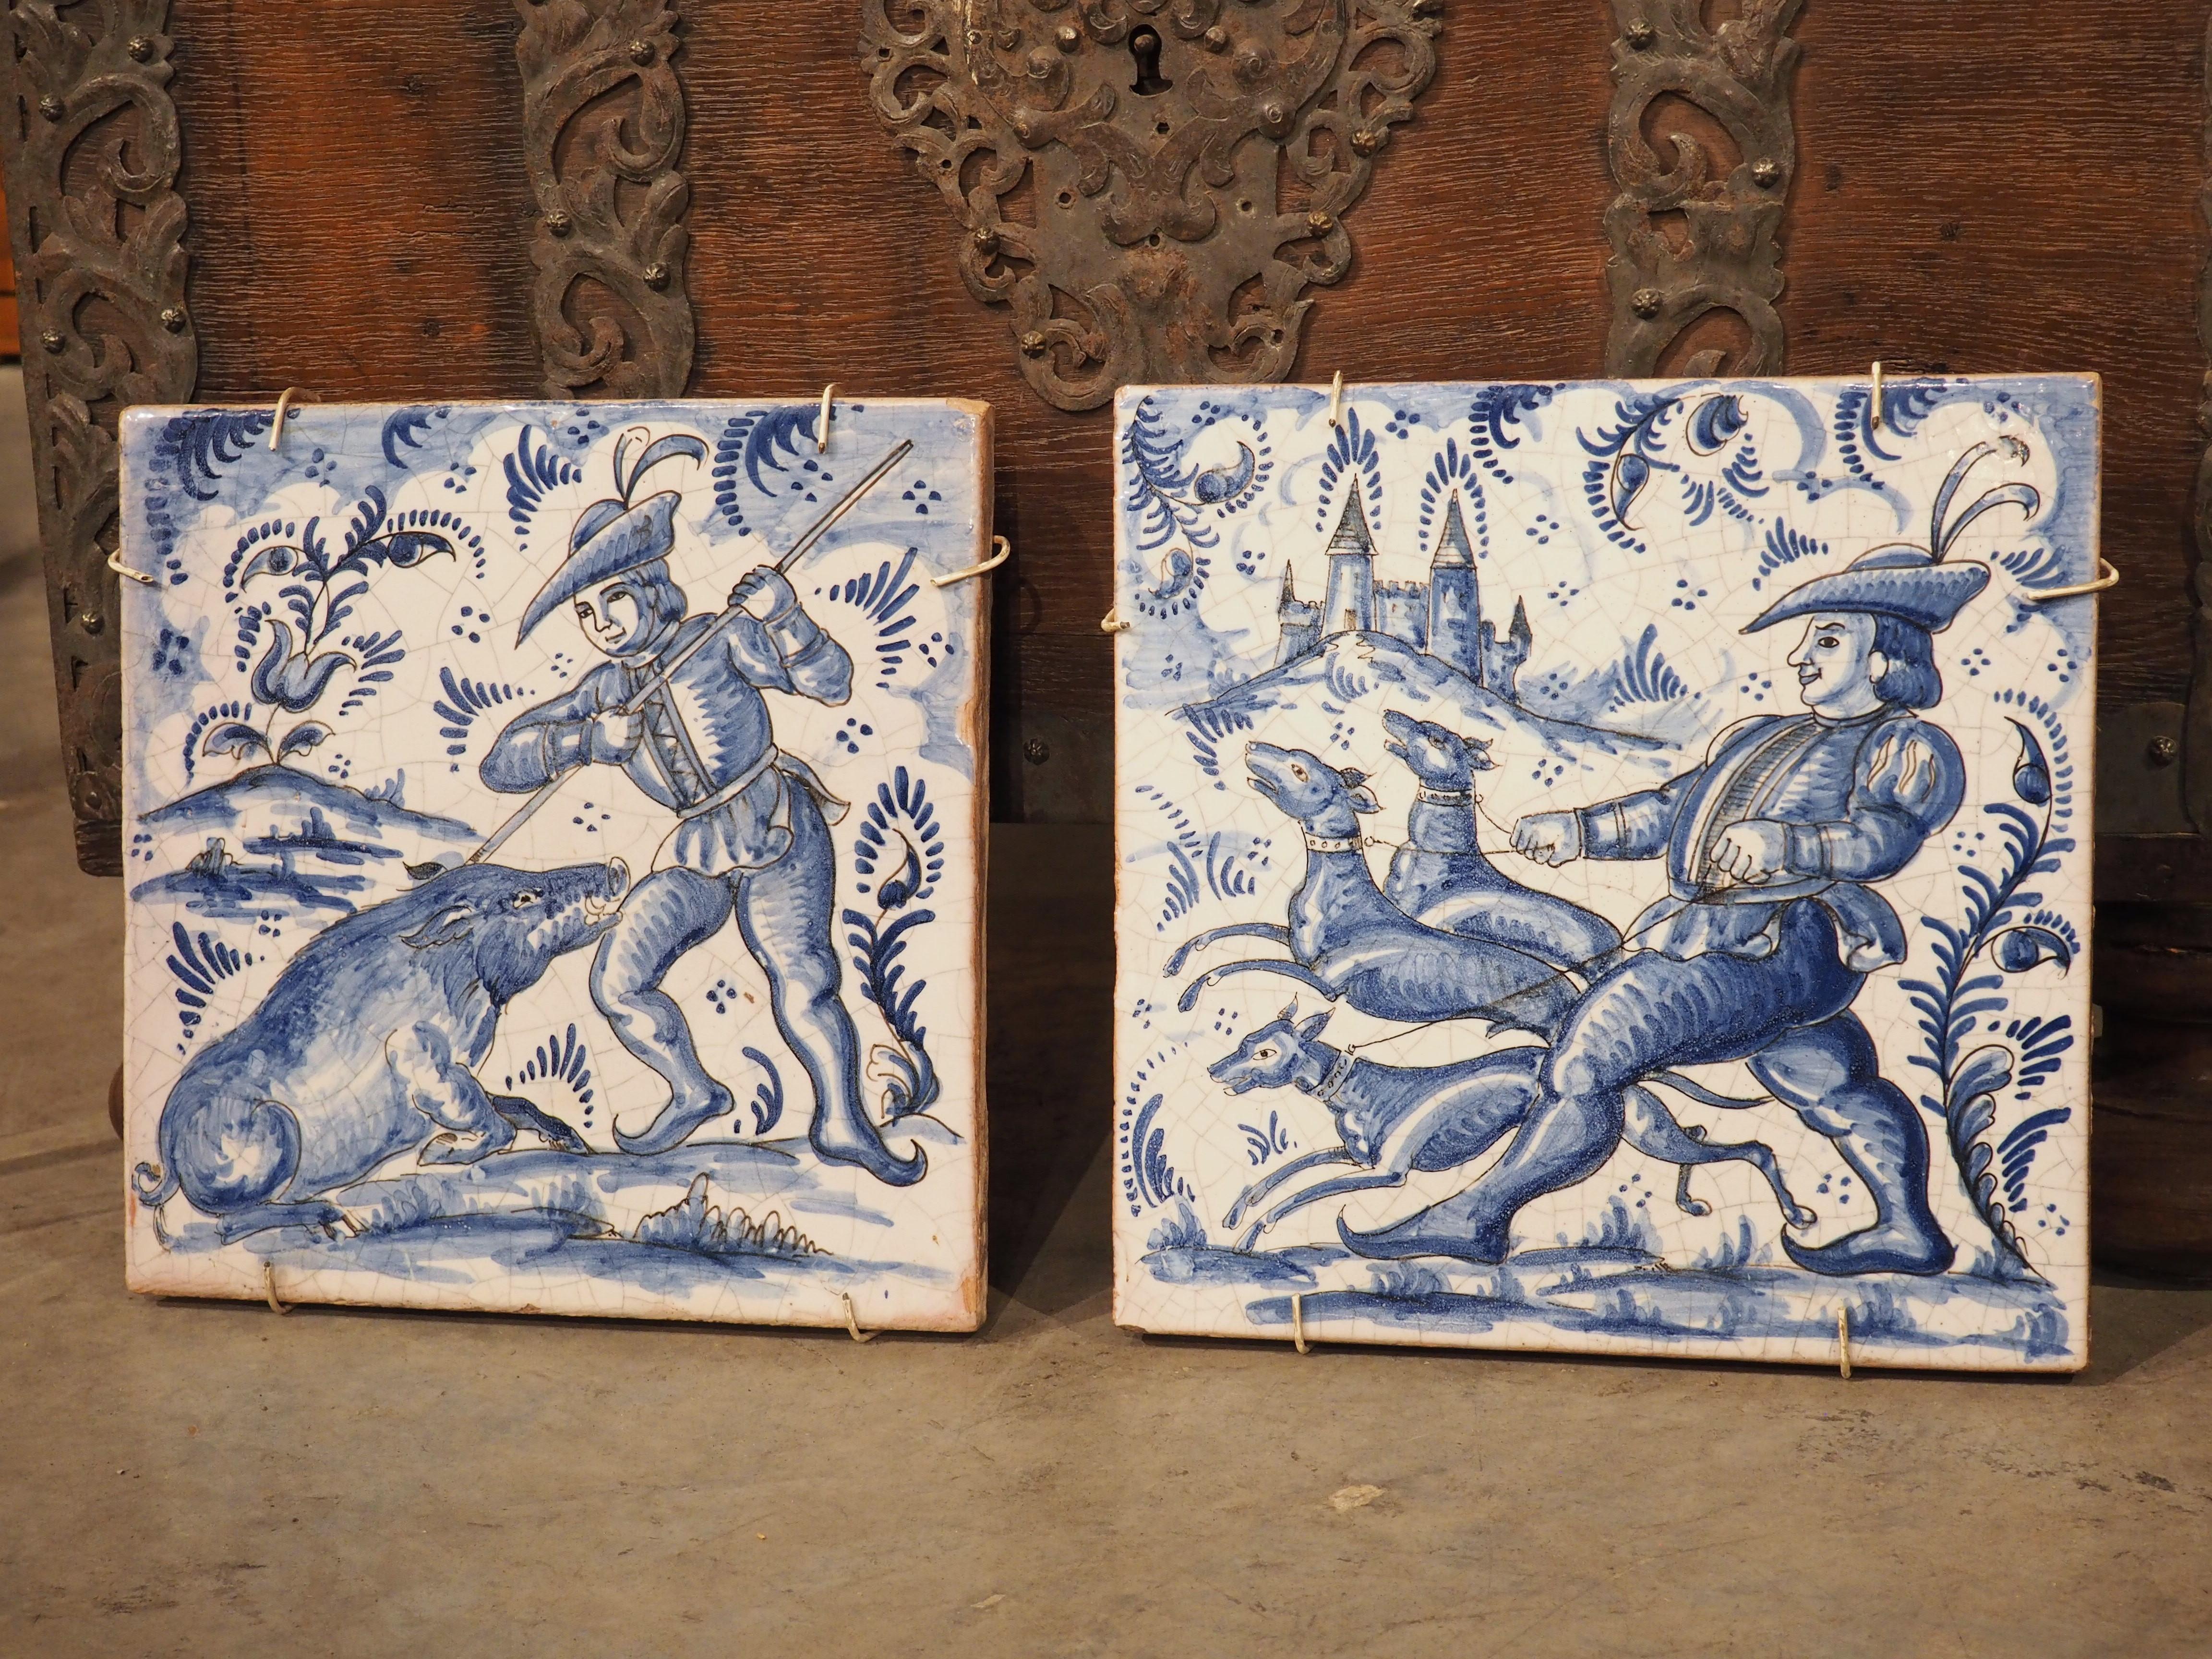 Reminiscent of 17th-century Portuguese azulejo tiles, which were inspired by Delft products of the Netherlands, this pair of French ceramic tiles has a cobalt blue and white color scheme. The roughly square tiles, which are from the 1800s, depict